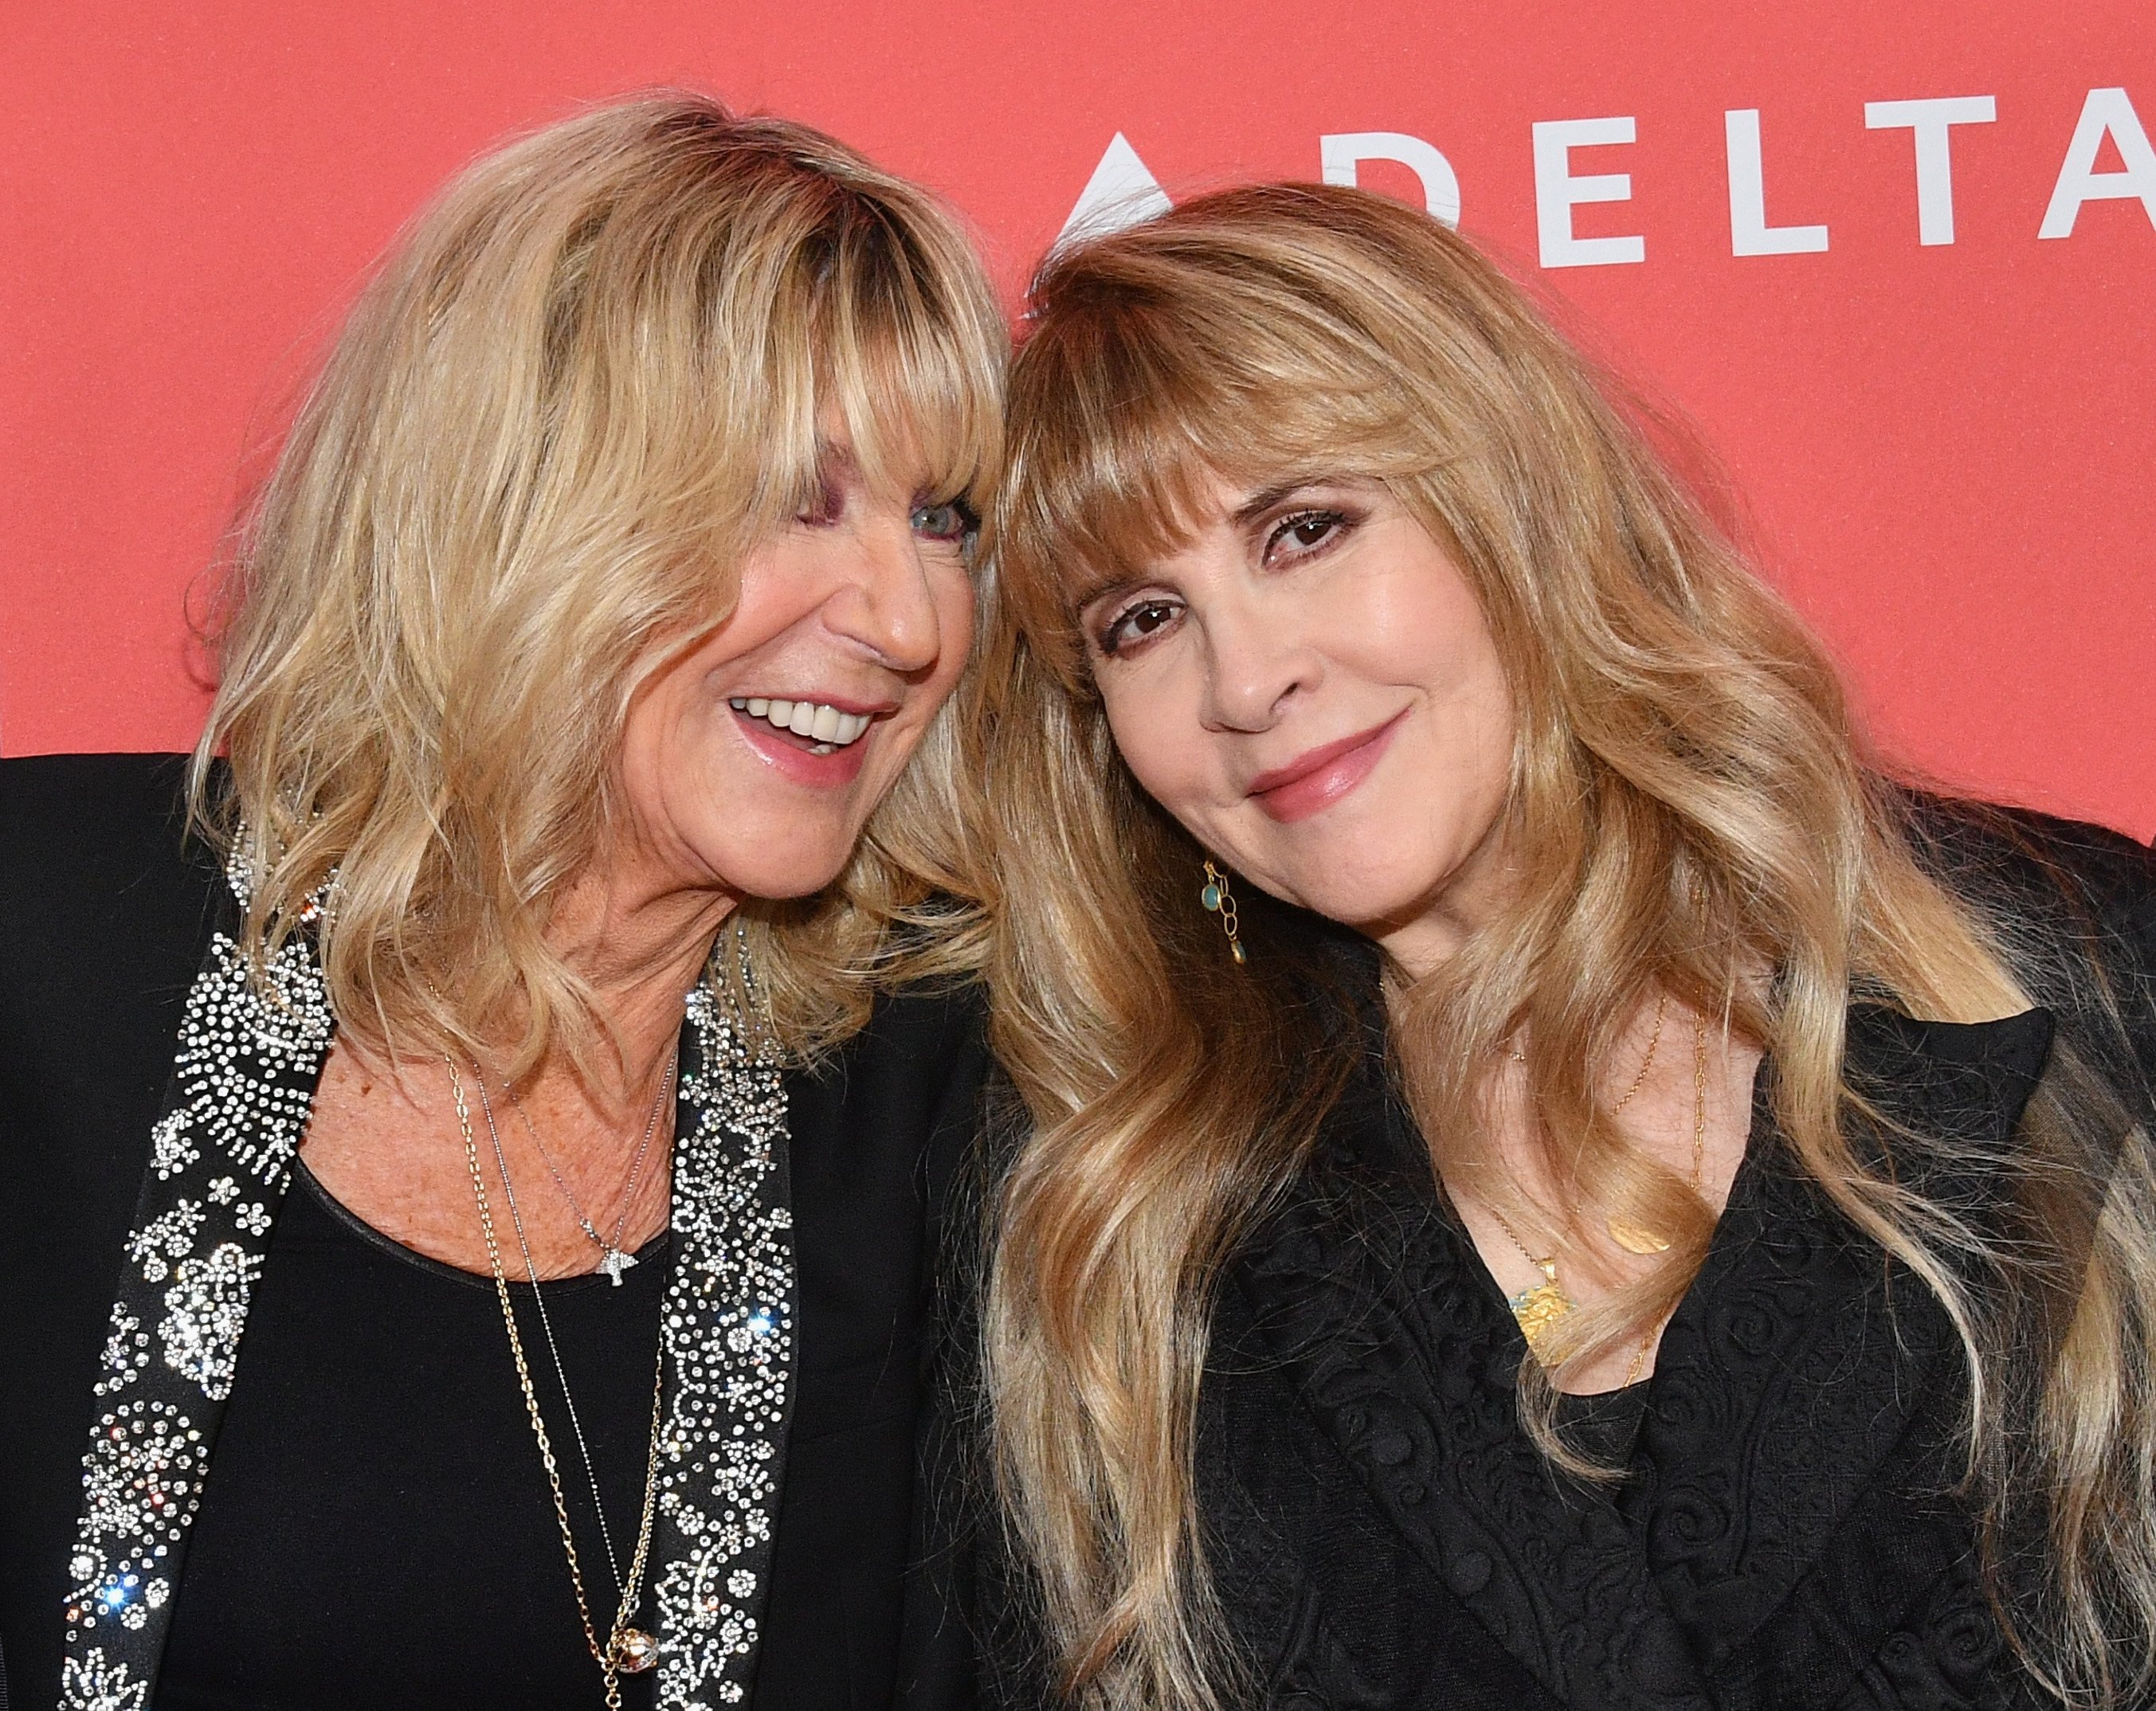 Christine McVie and Stevie Nicks both wear black and stand in front of a red background.